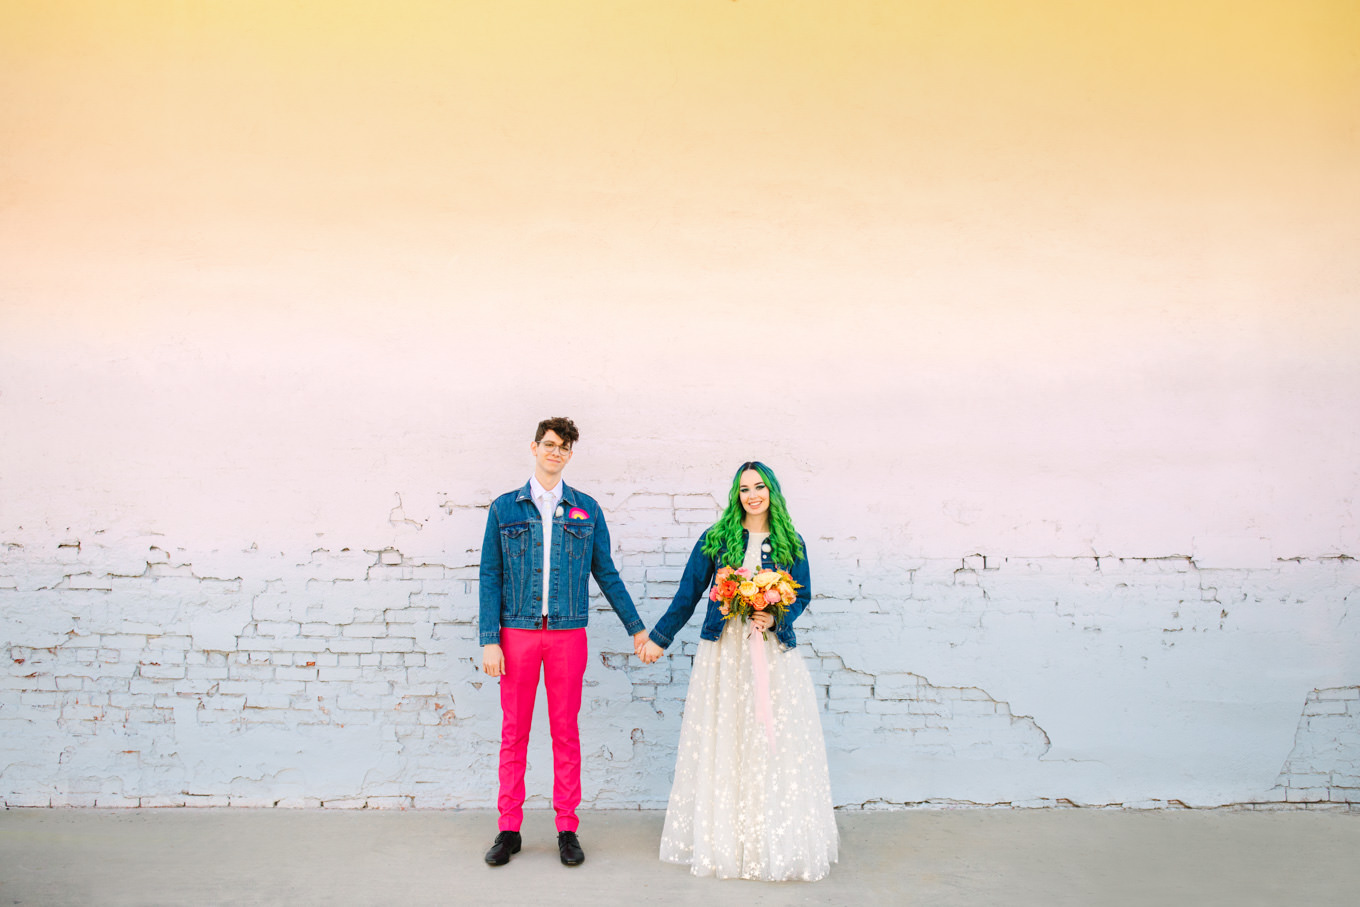 Bride and groom in matching jean jackets | Colorful wedding at The Unique Space Los Angeles published in The Knot Magazine | Fresh and colorful photography for fun-loving couples in Southern California | #colorfulwedding #losangeleswedding #weddingphotography #uniquespace Source: Mary Costa Photography | Los Angeles